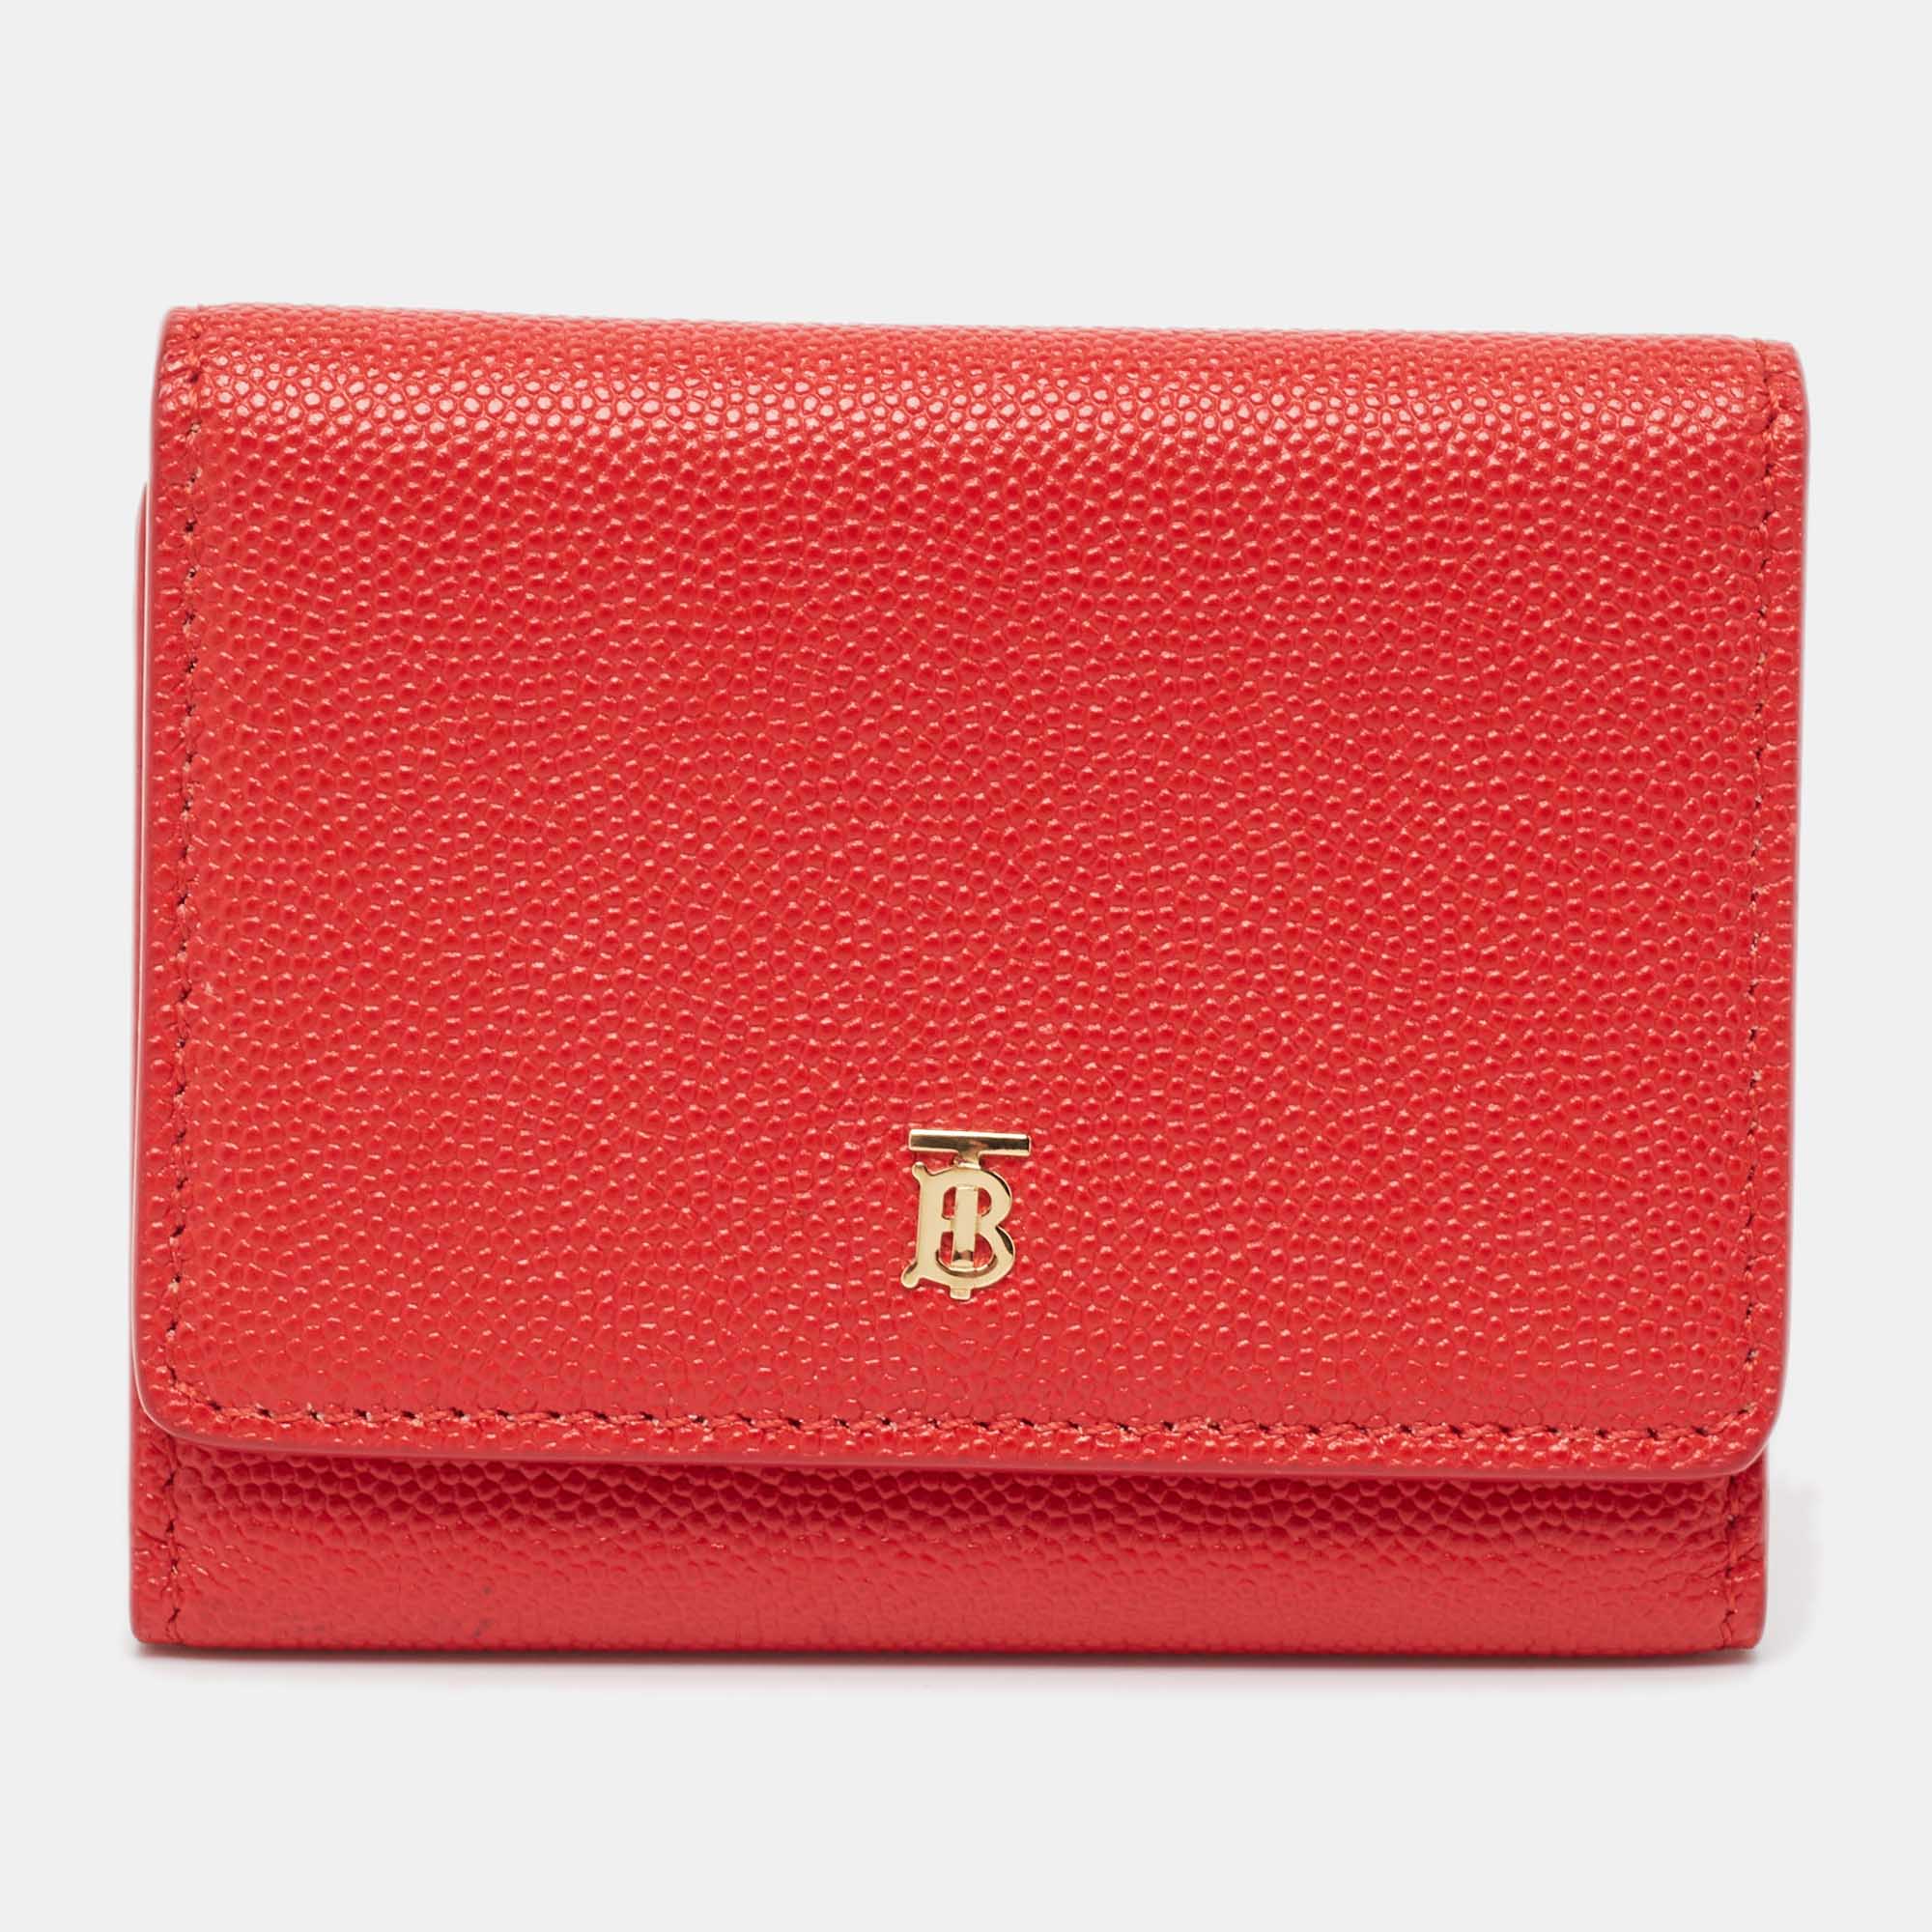 Burberry red leather sidney trifold wallet